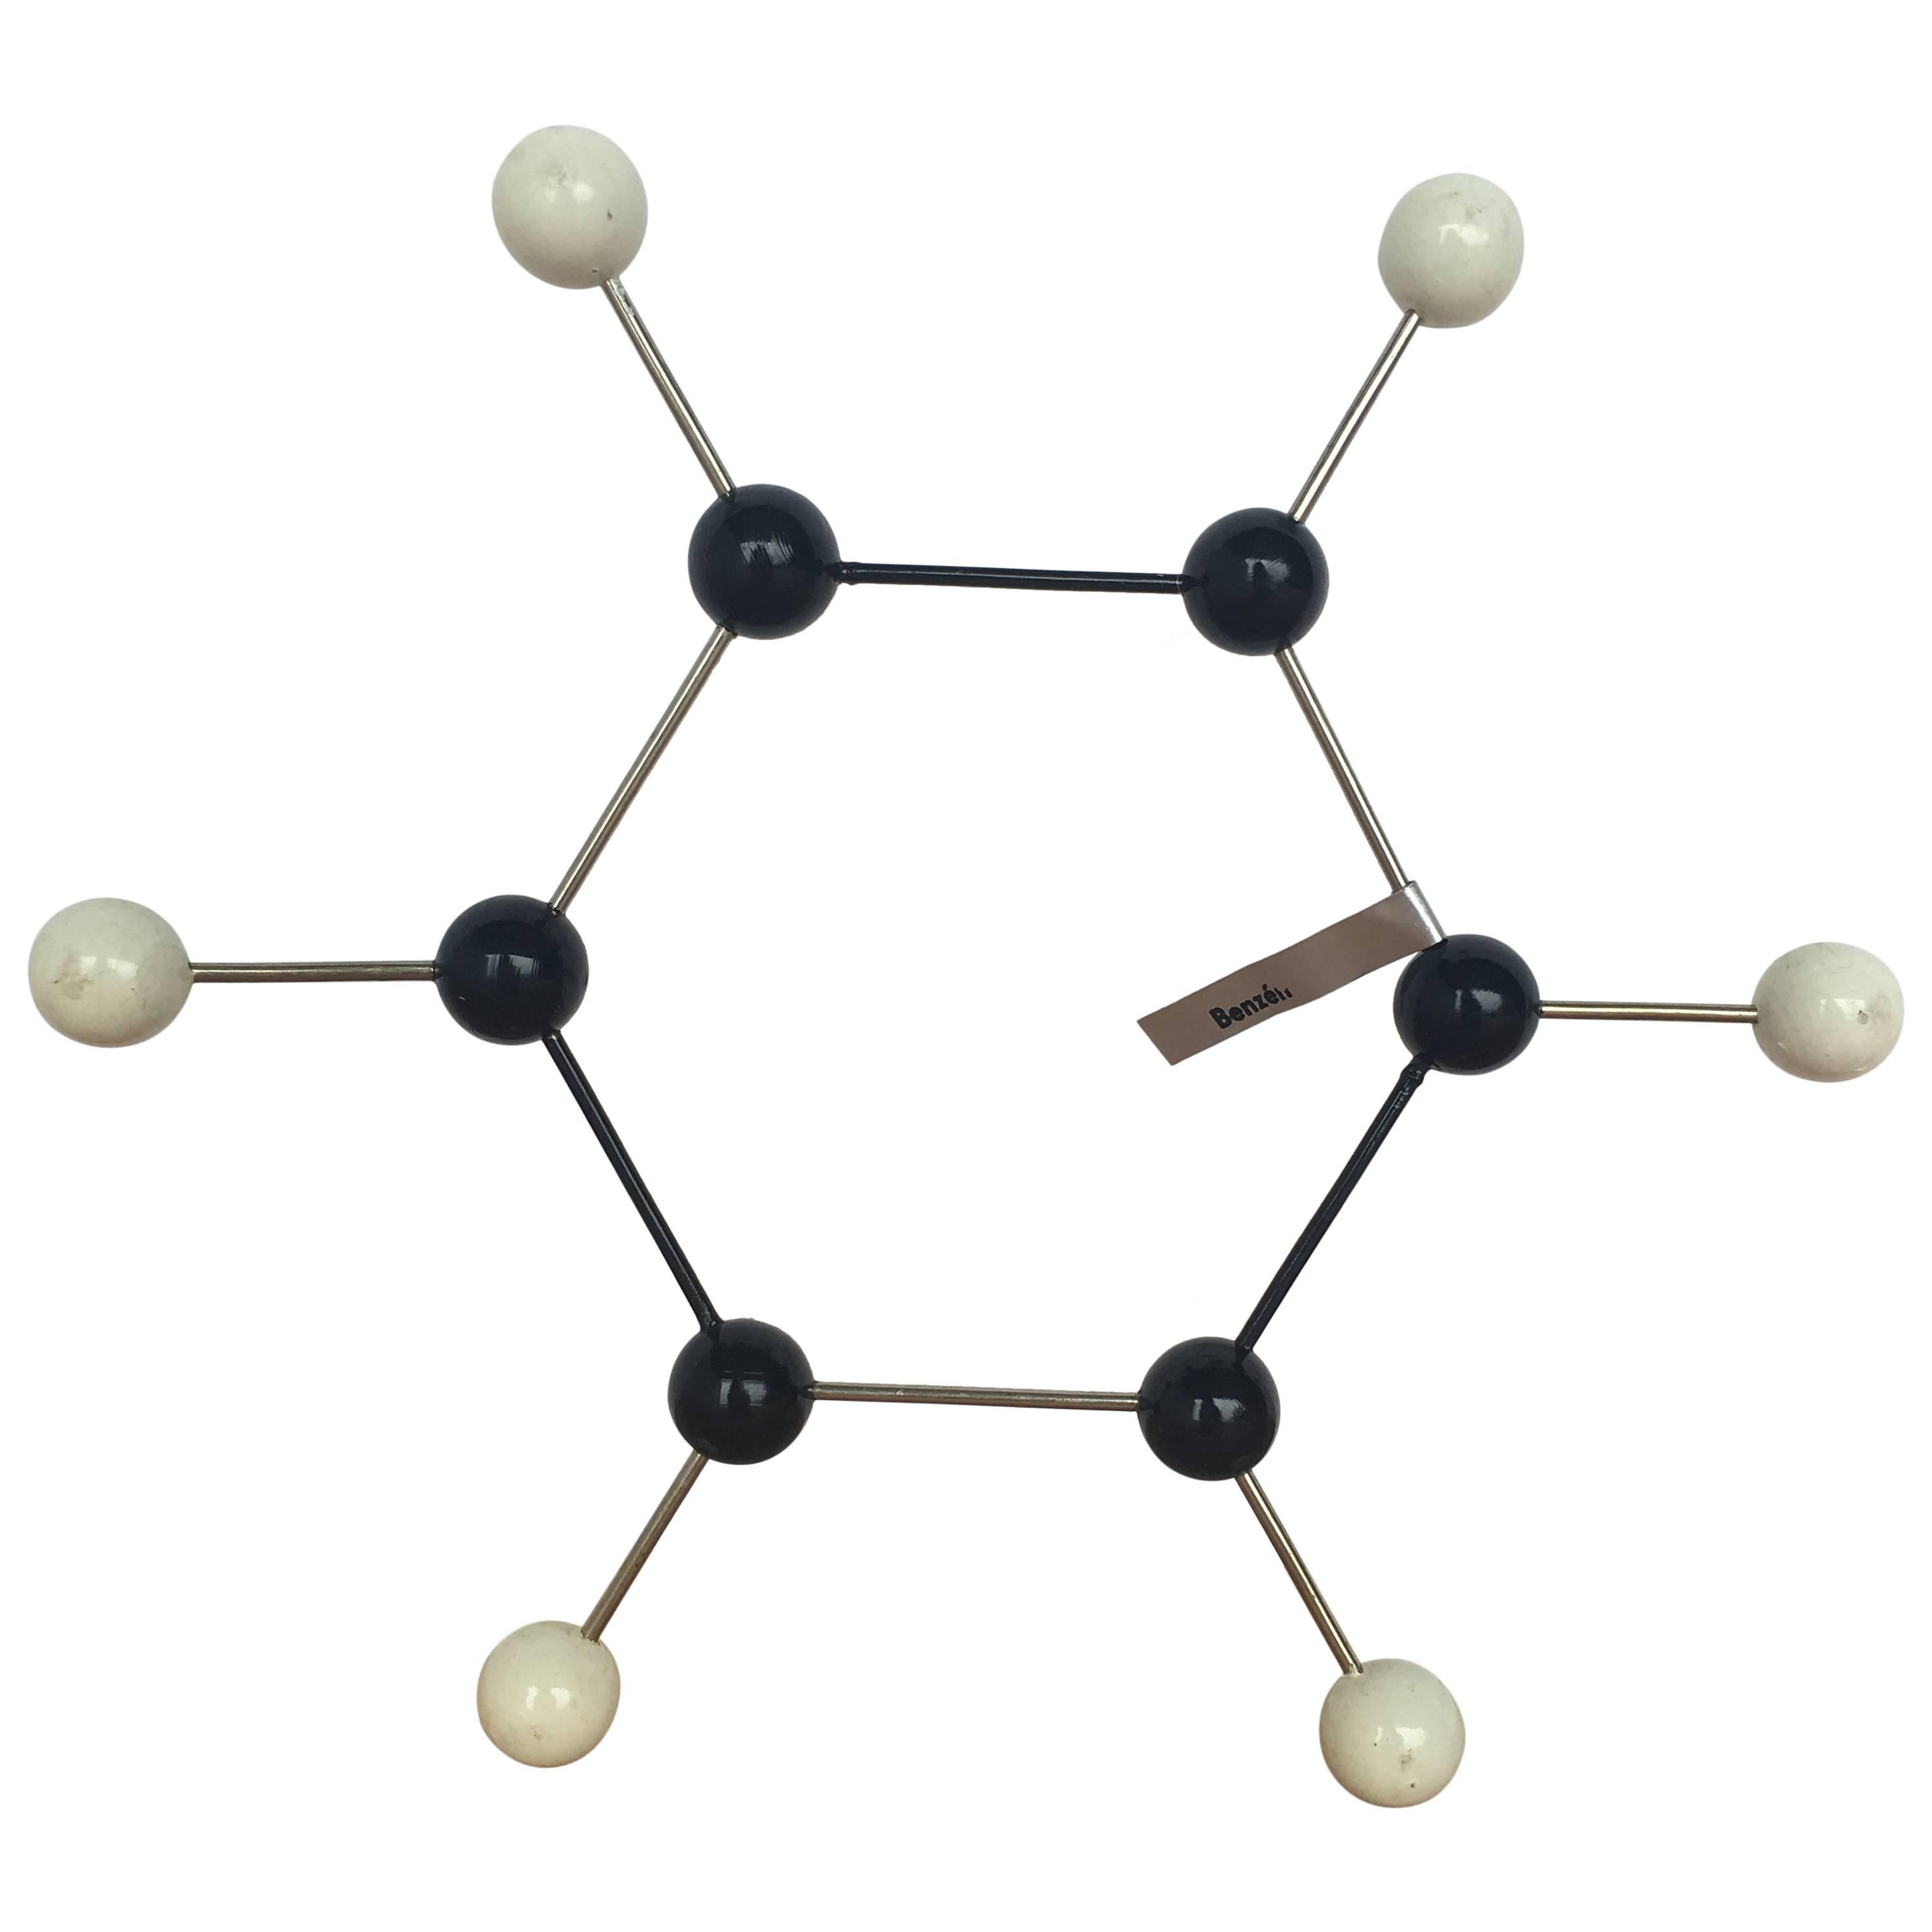 Vintage Ball and Stick Molecular Model of Benzene For Sale